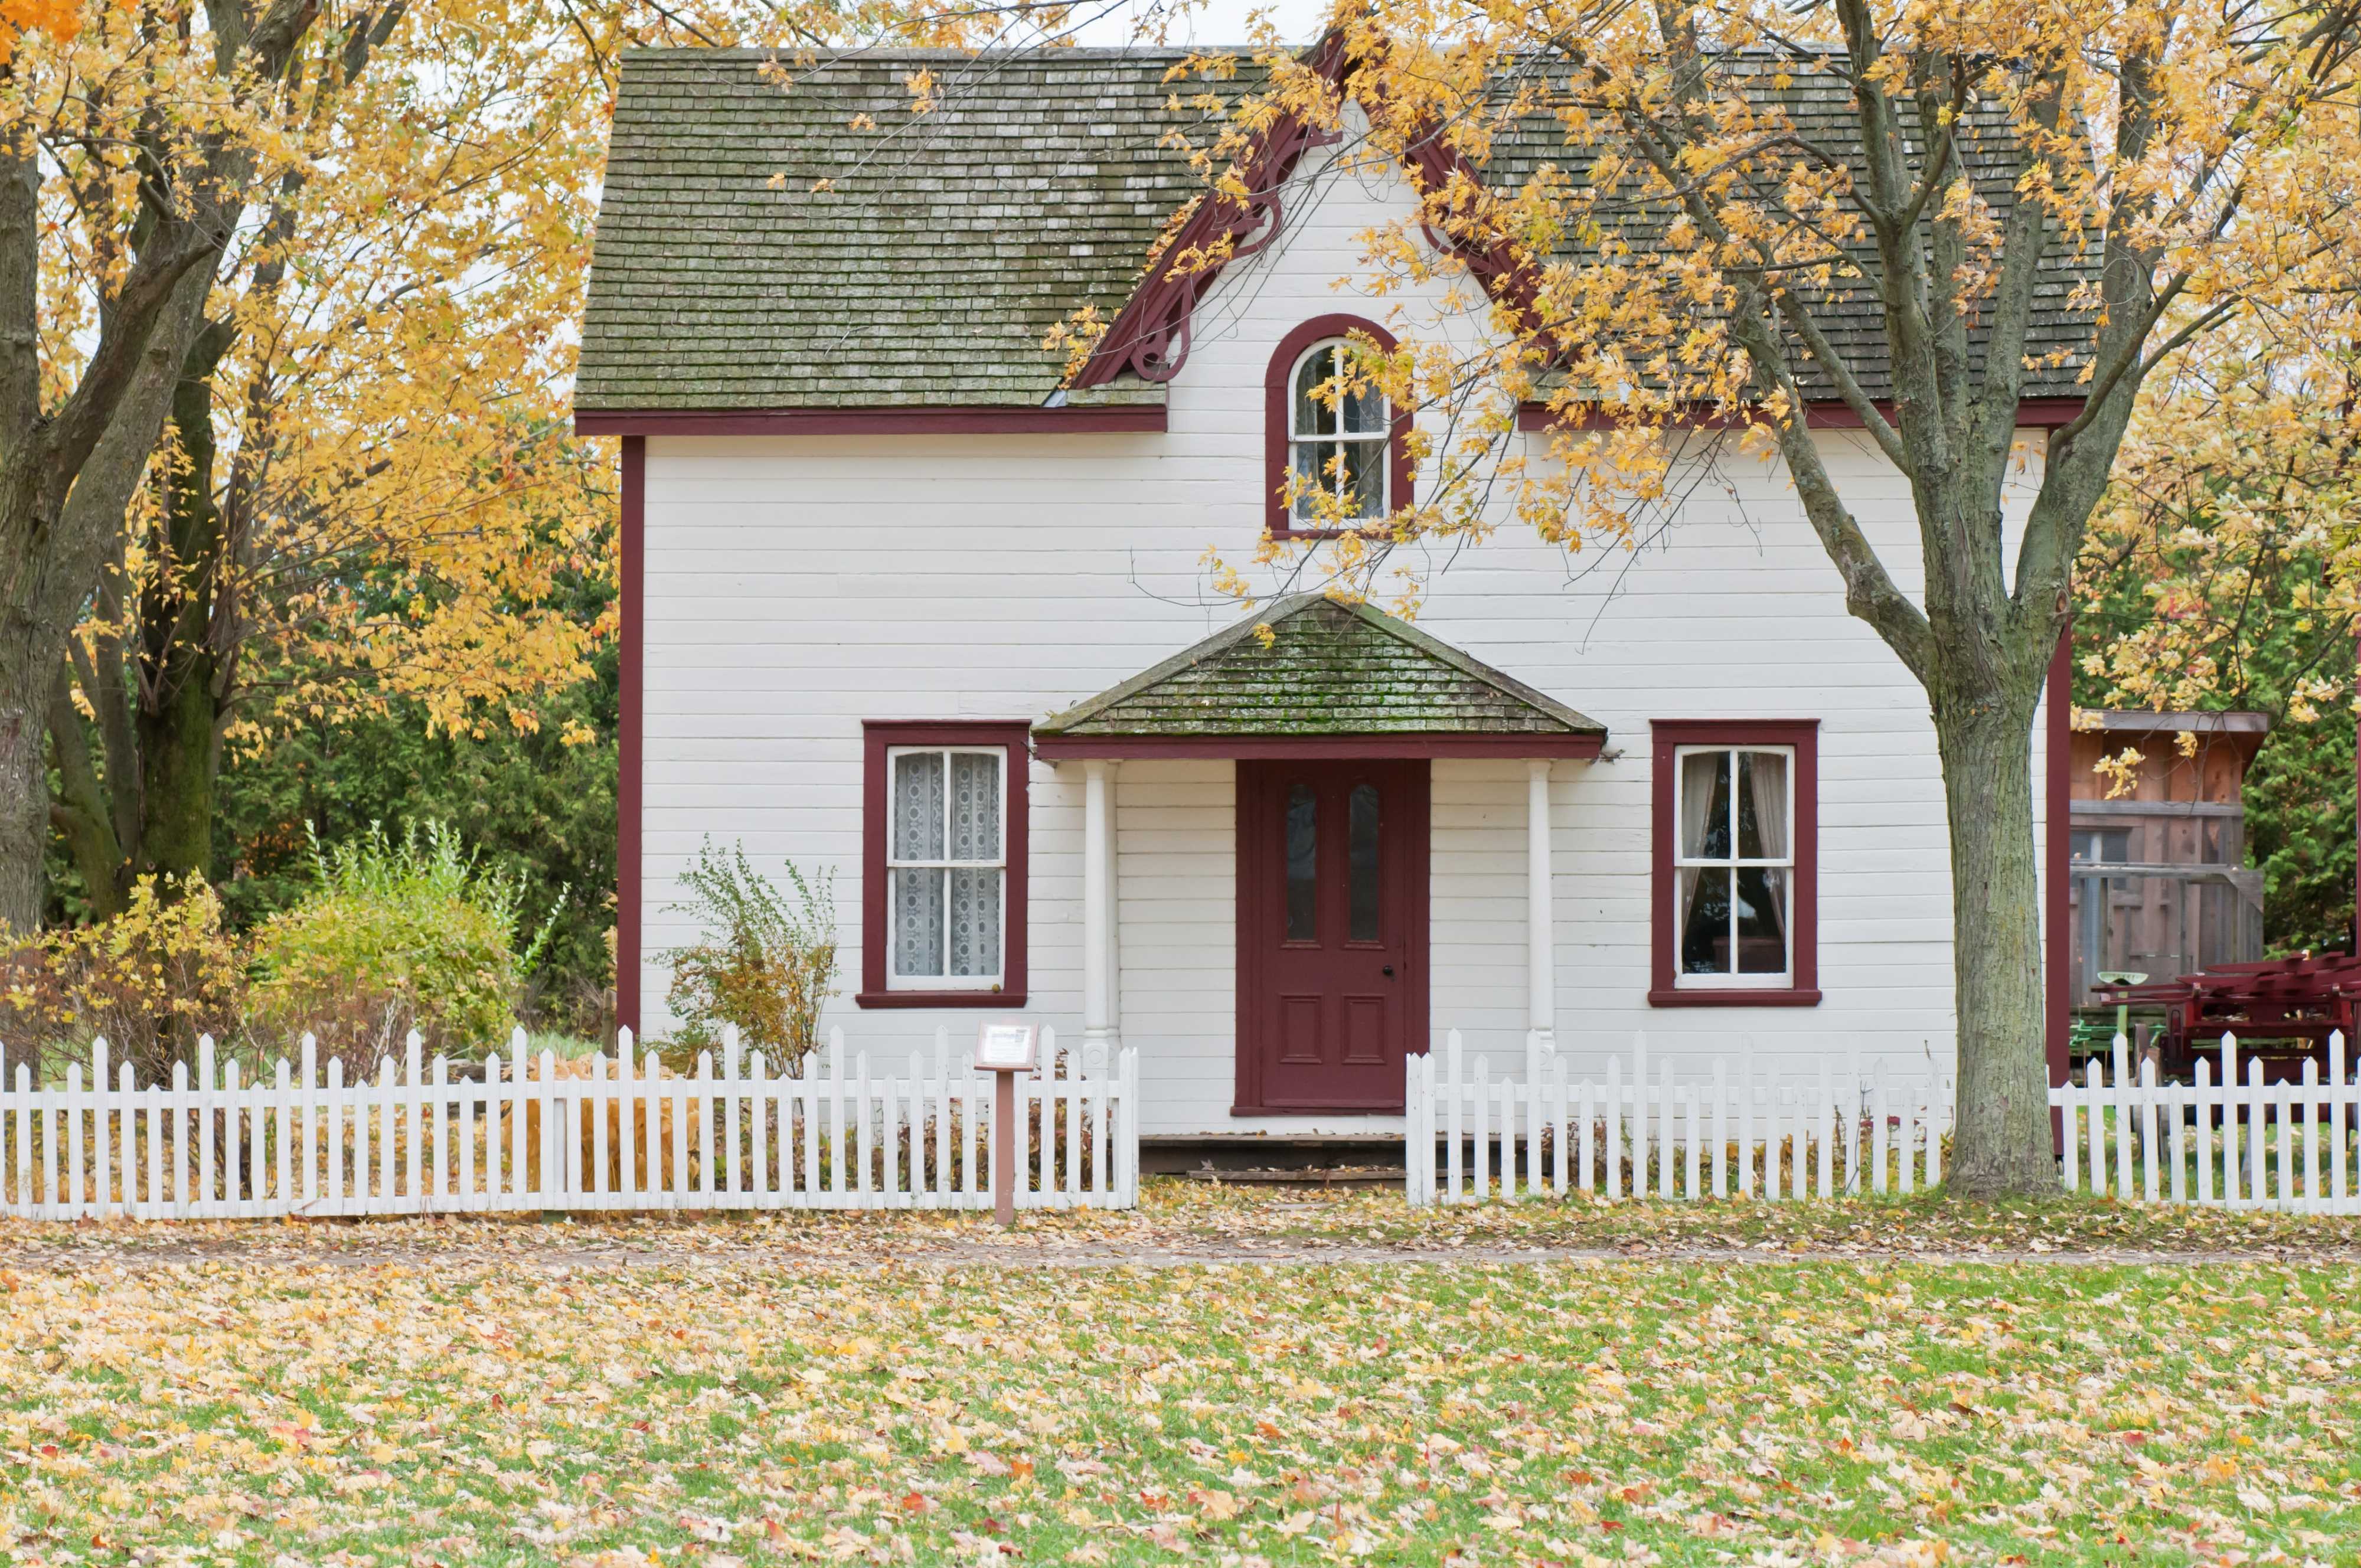 House with leaves